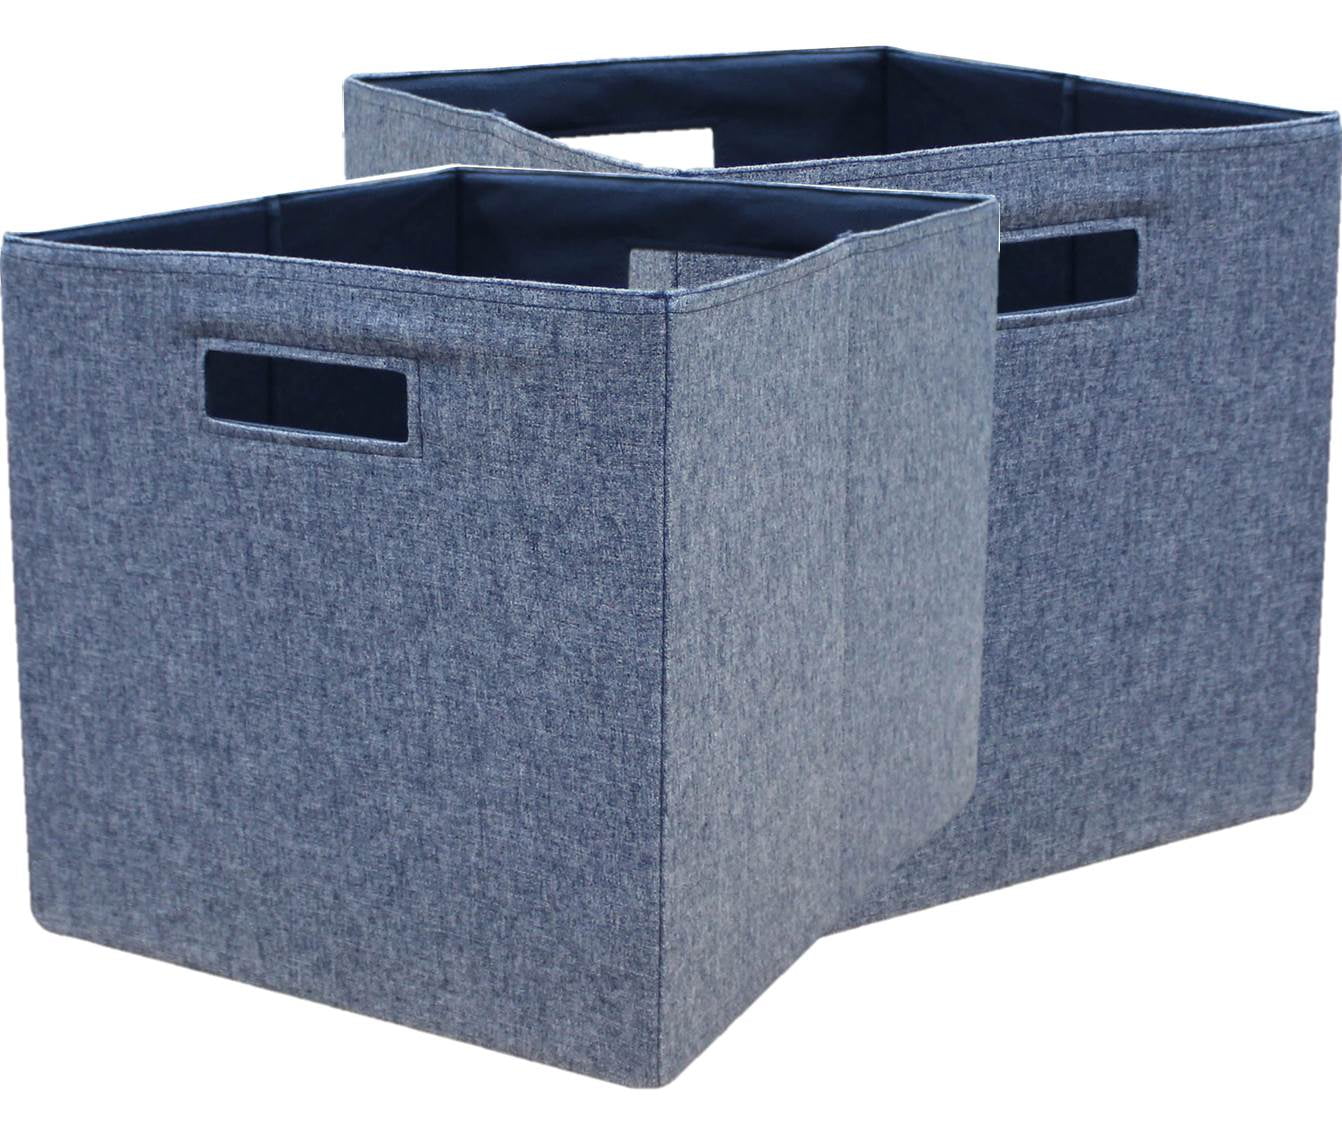 Brown Collapsible Storage Cube Bins Set of 4 Containers with Handles 9"x9"x8" 